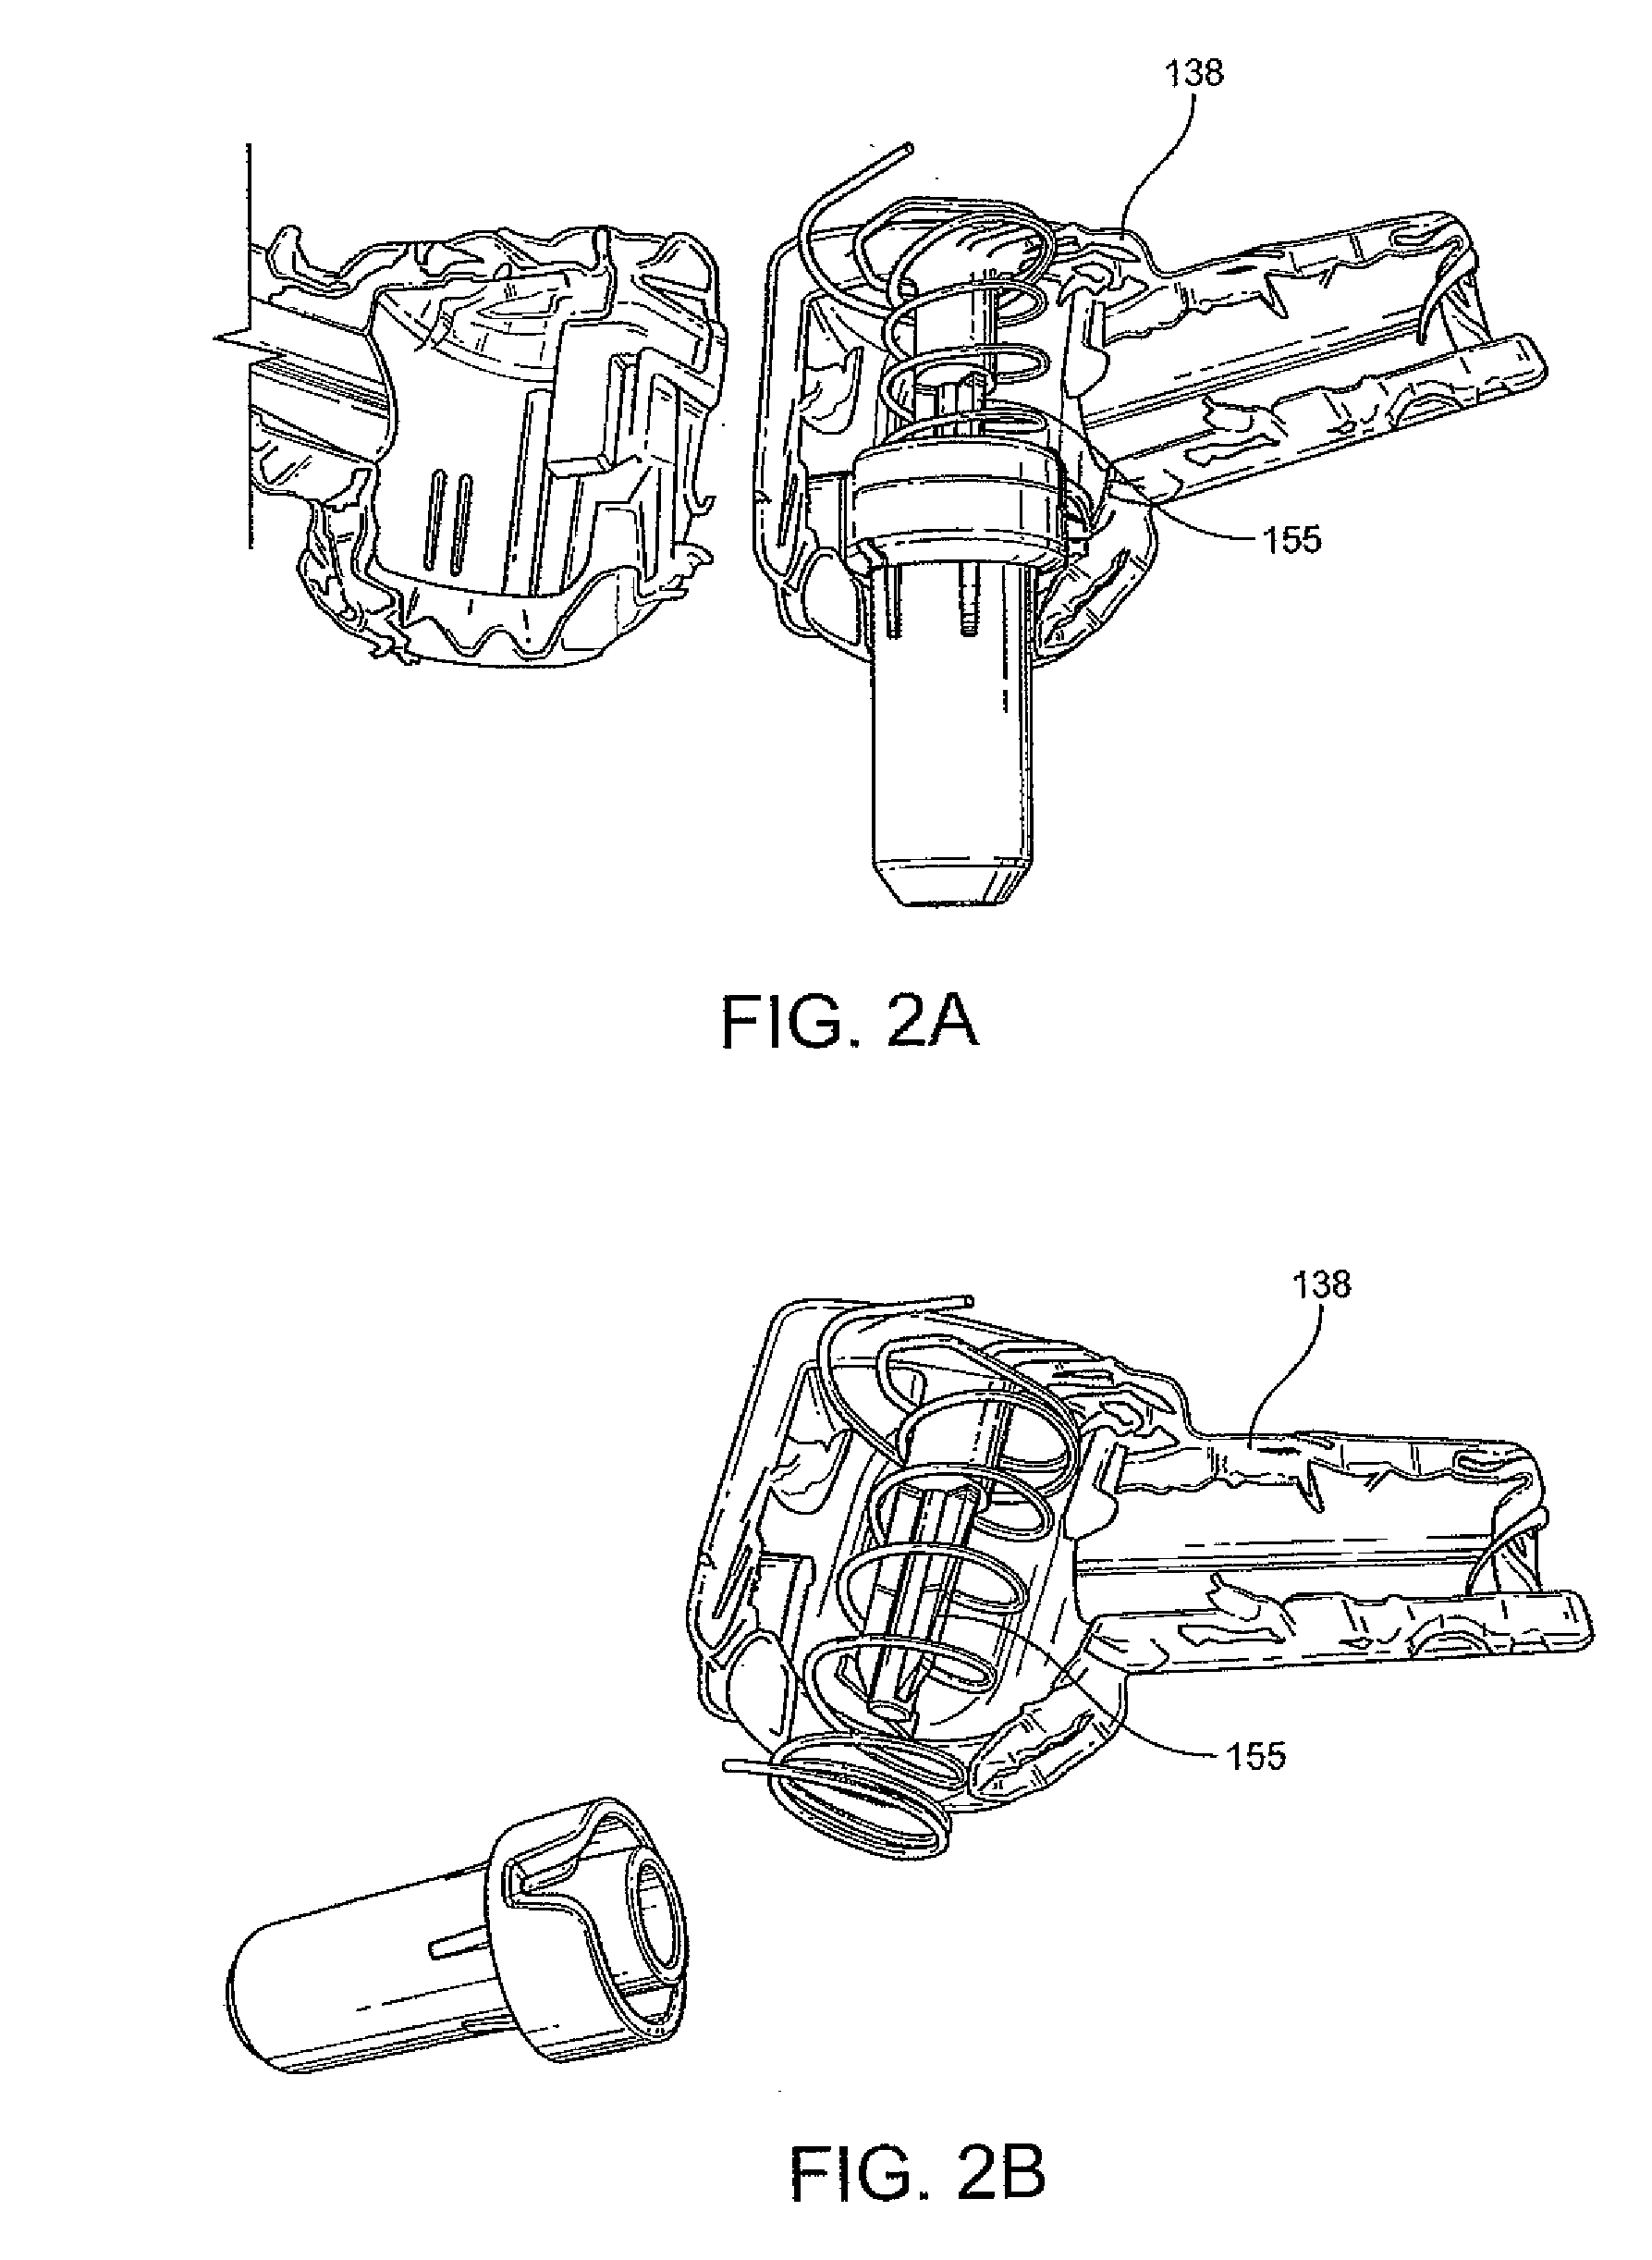 Active gases and treatment methods